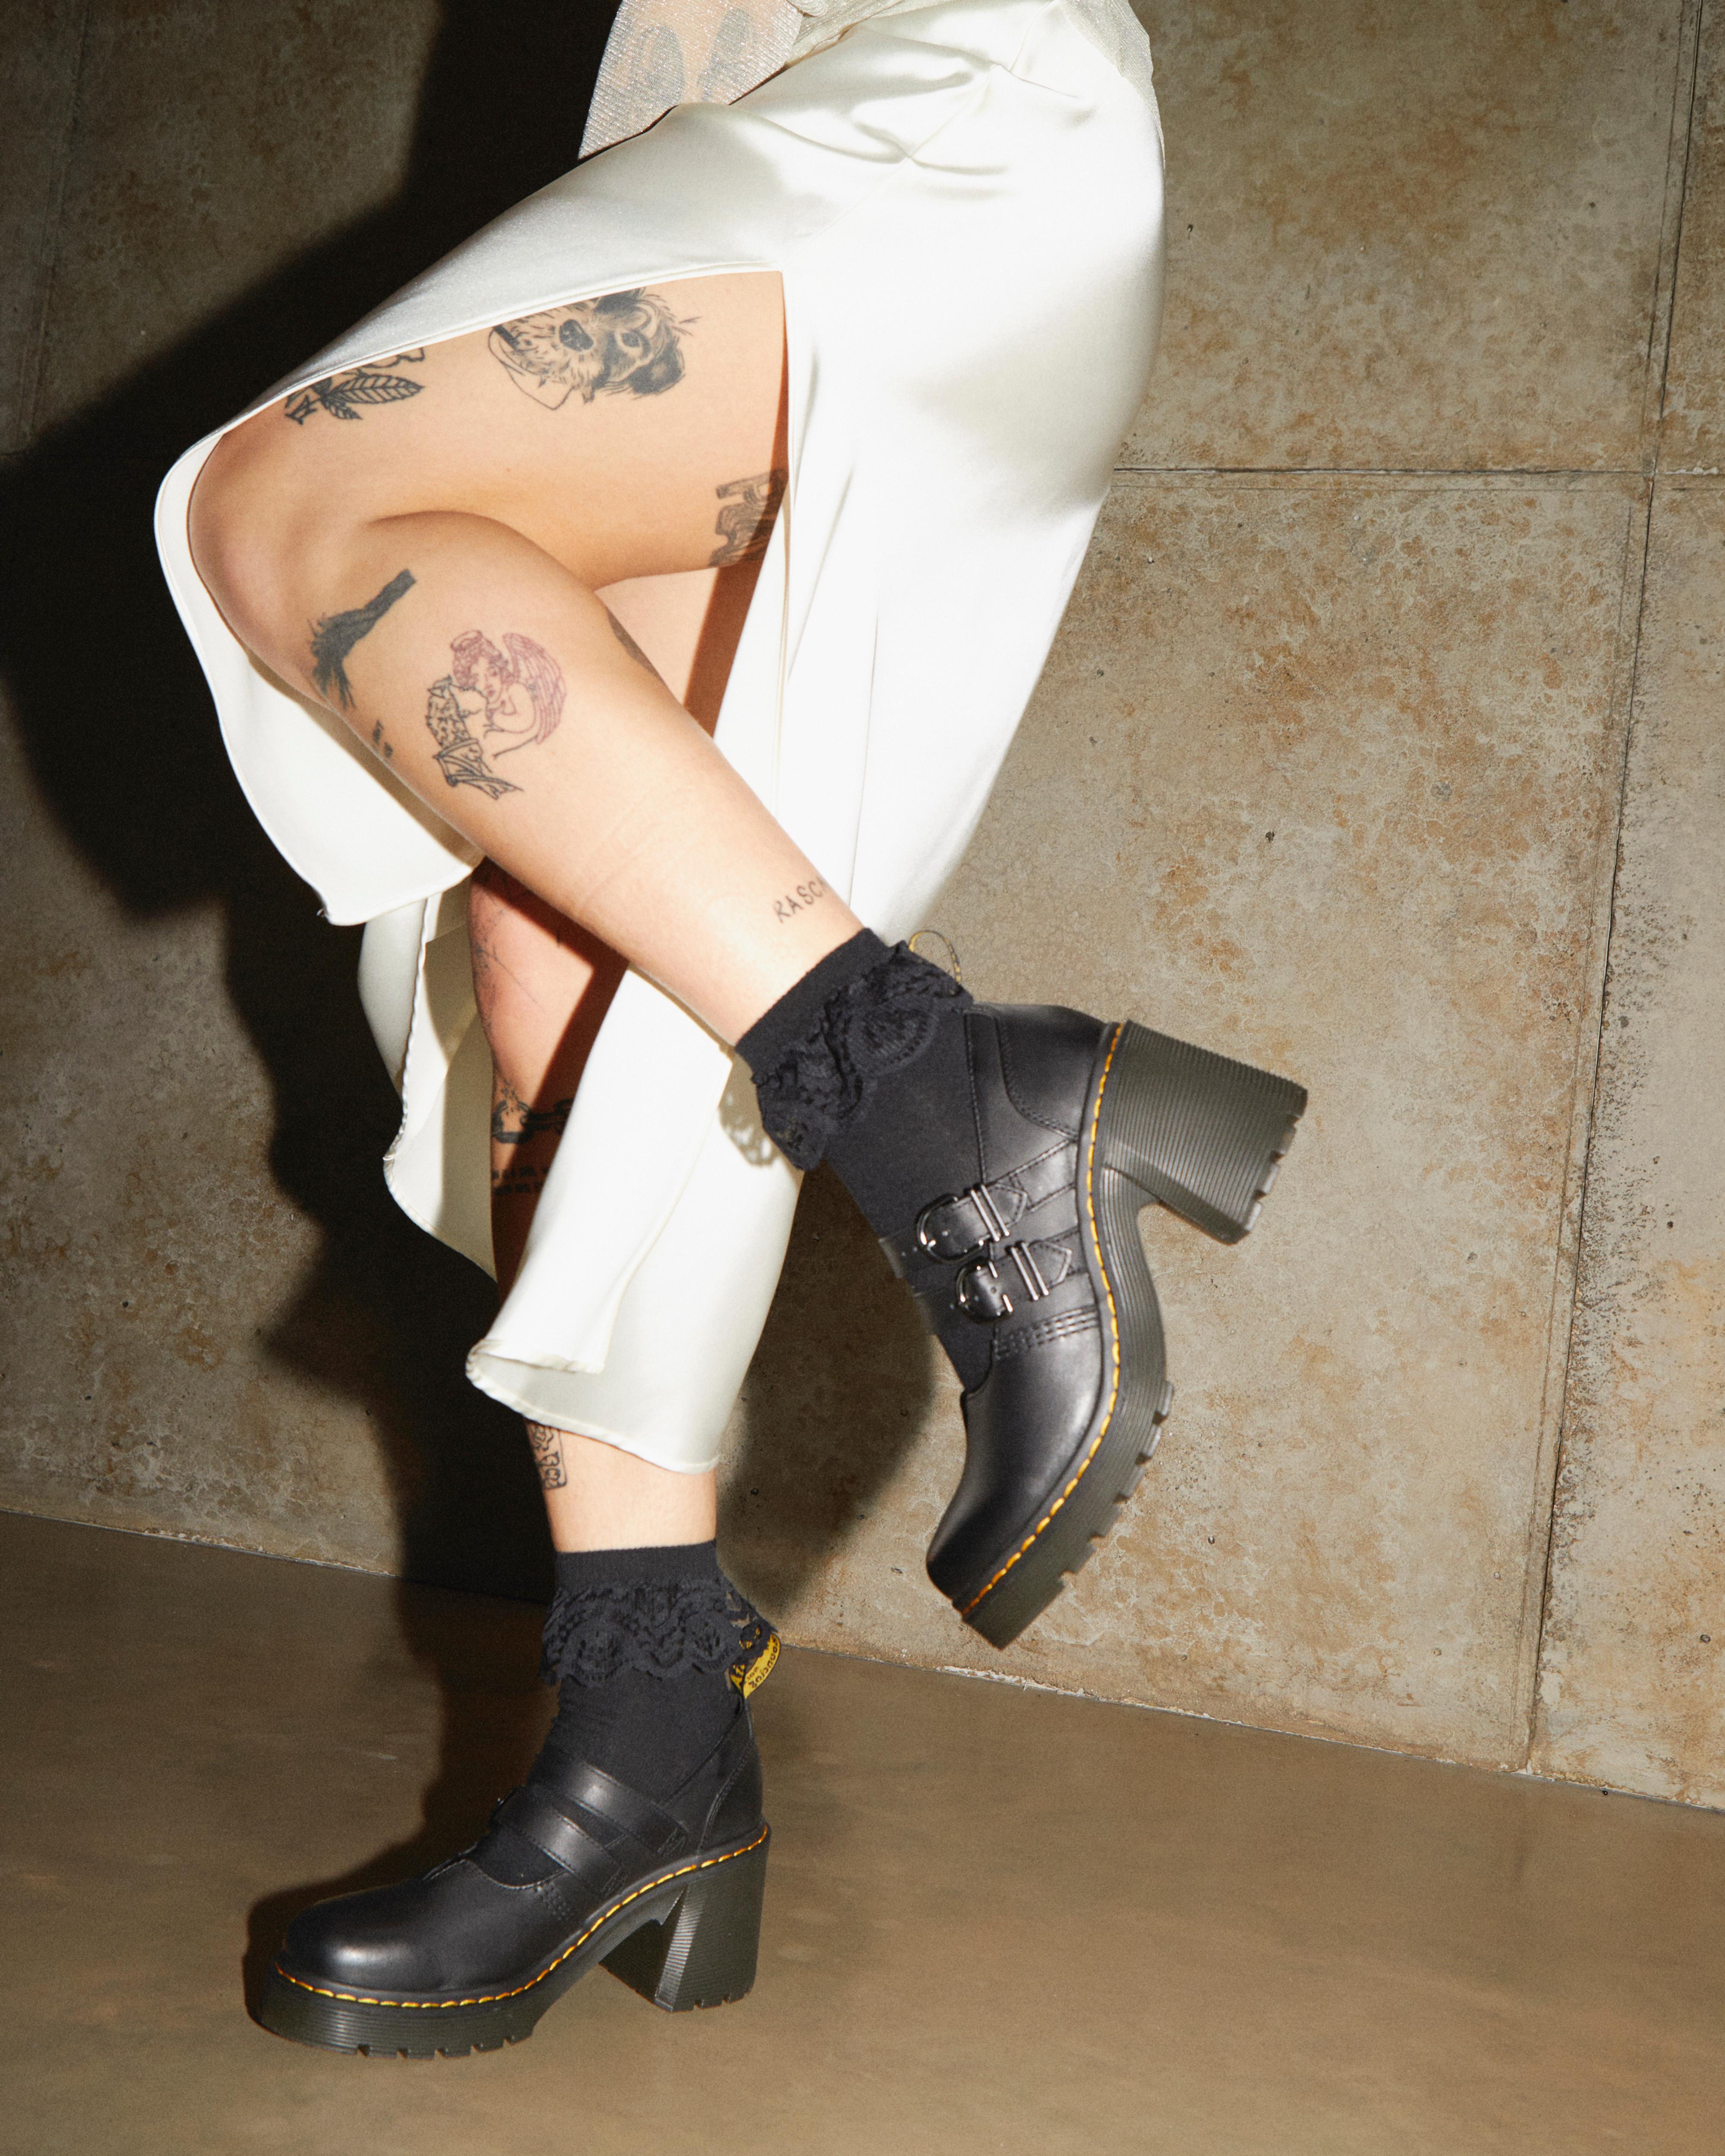 Eviee Sendal Leather Heeled ShoesEviee Sendal Leather Heeled Mary Jane Shoes Dr. Martens